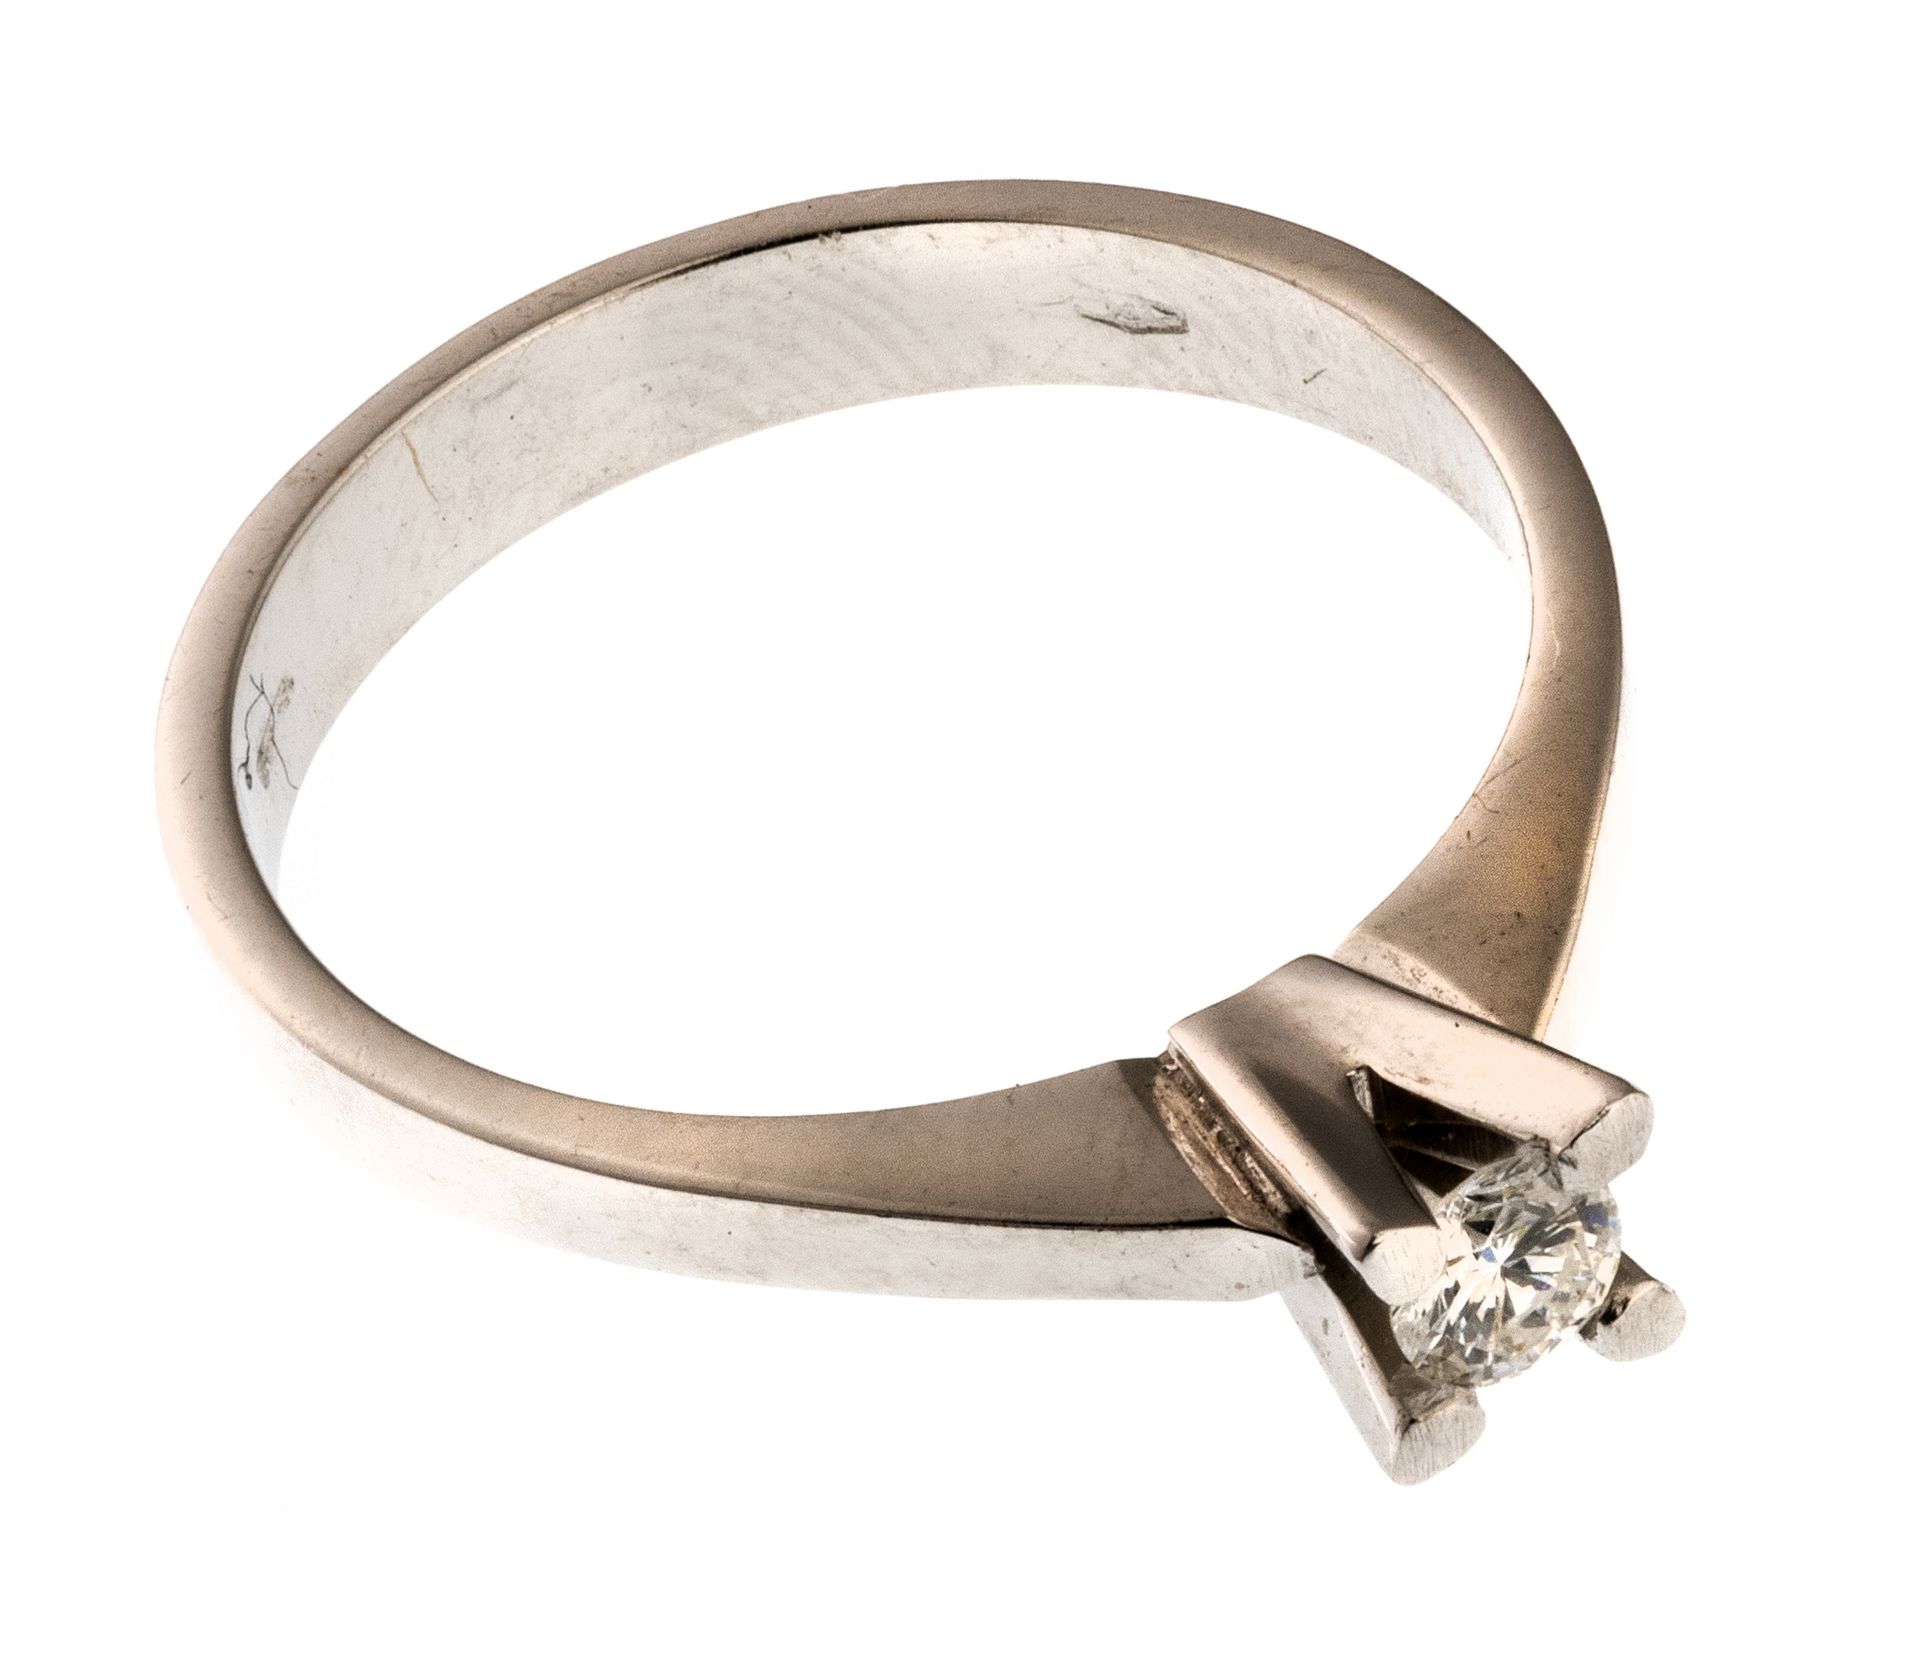 WHITE GOLD SOLITAIRE RING WITH DIAMOND